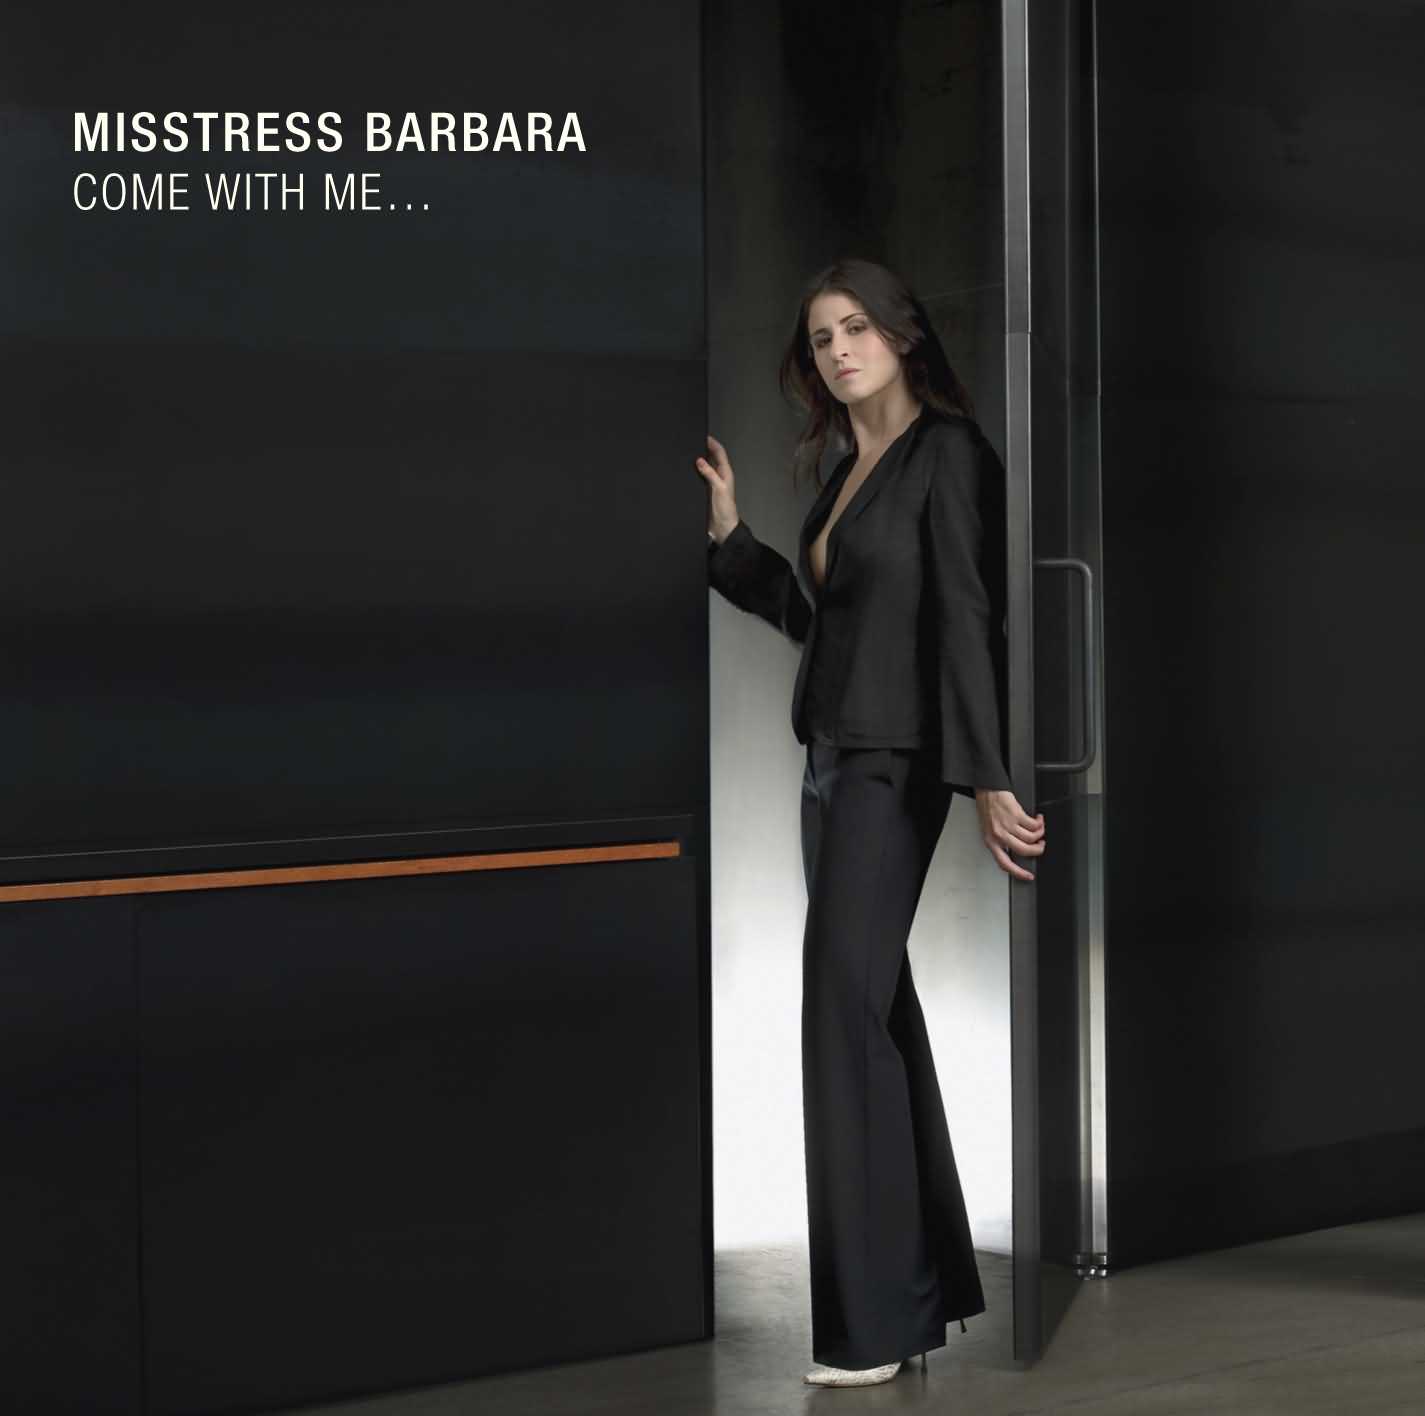 Misstress Barbara - Come With Me...